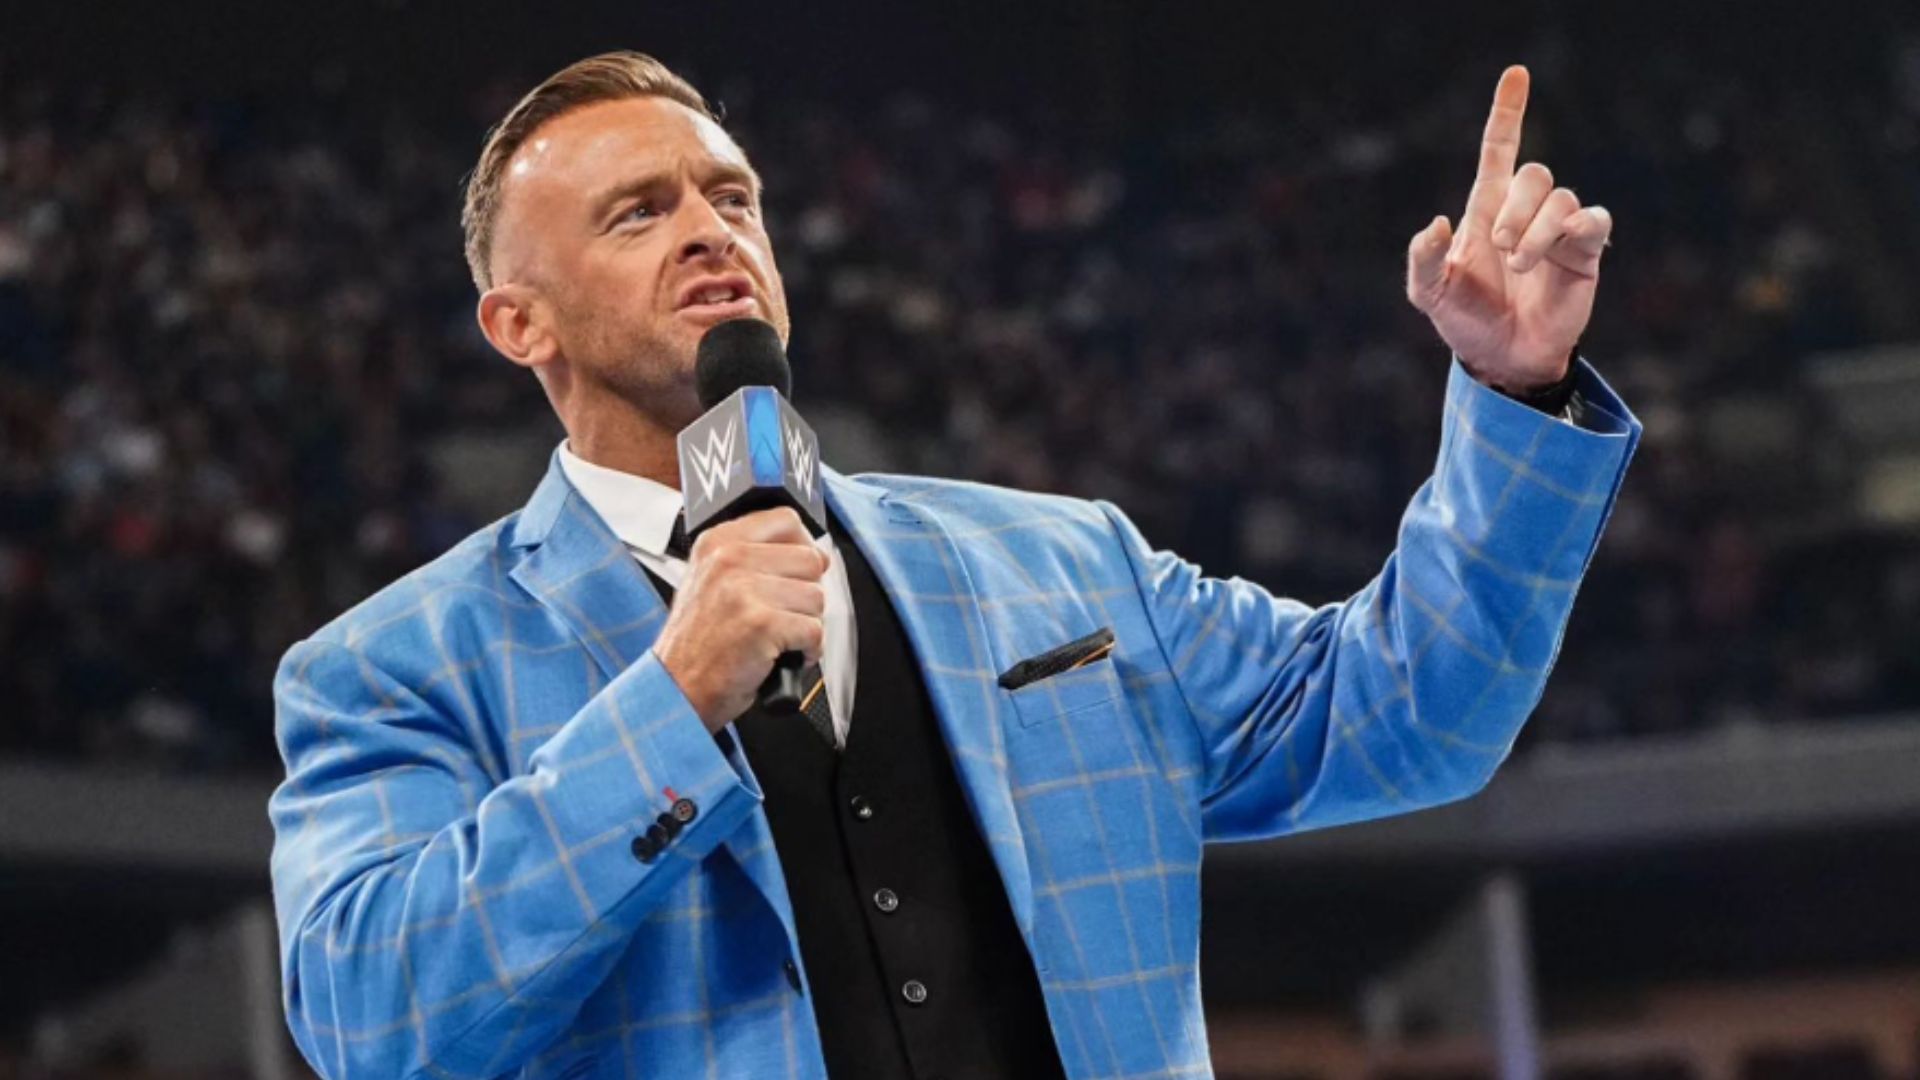 Nick Aldis had some interesting comments this week